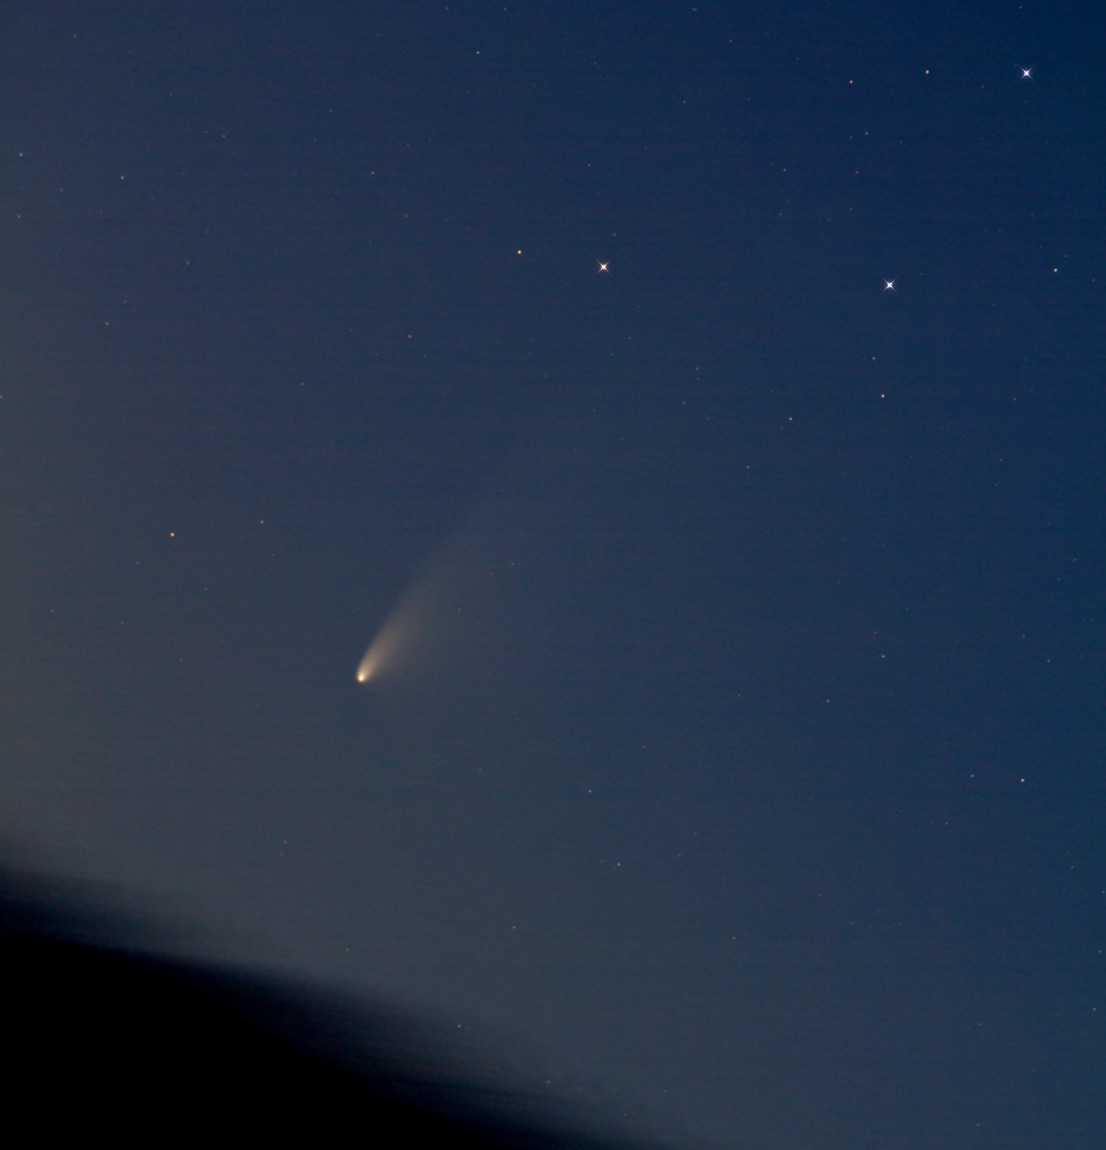 C/2011 L4 (PanStarrs) taken in Gemona del Friuli in march 23rd, 2013: 118 KB; click on the image to enlarge